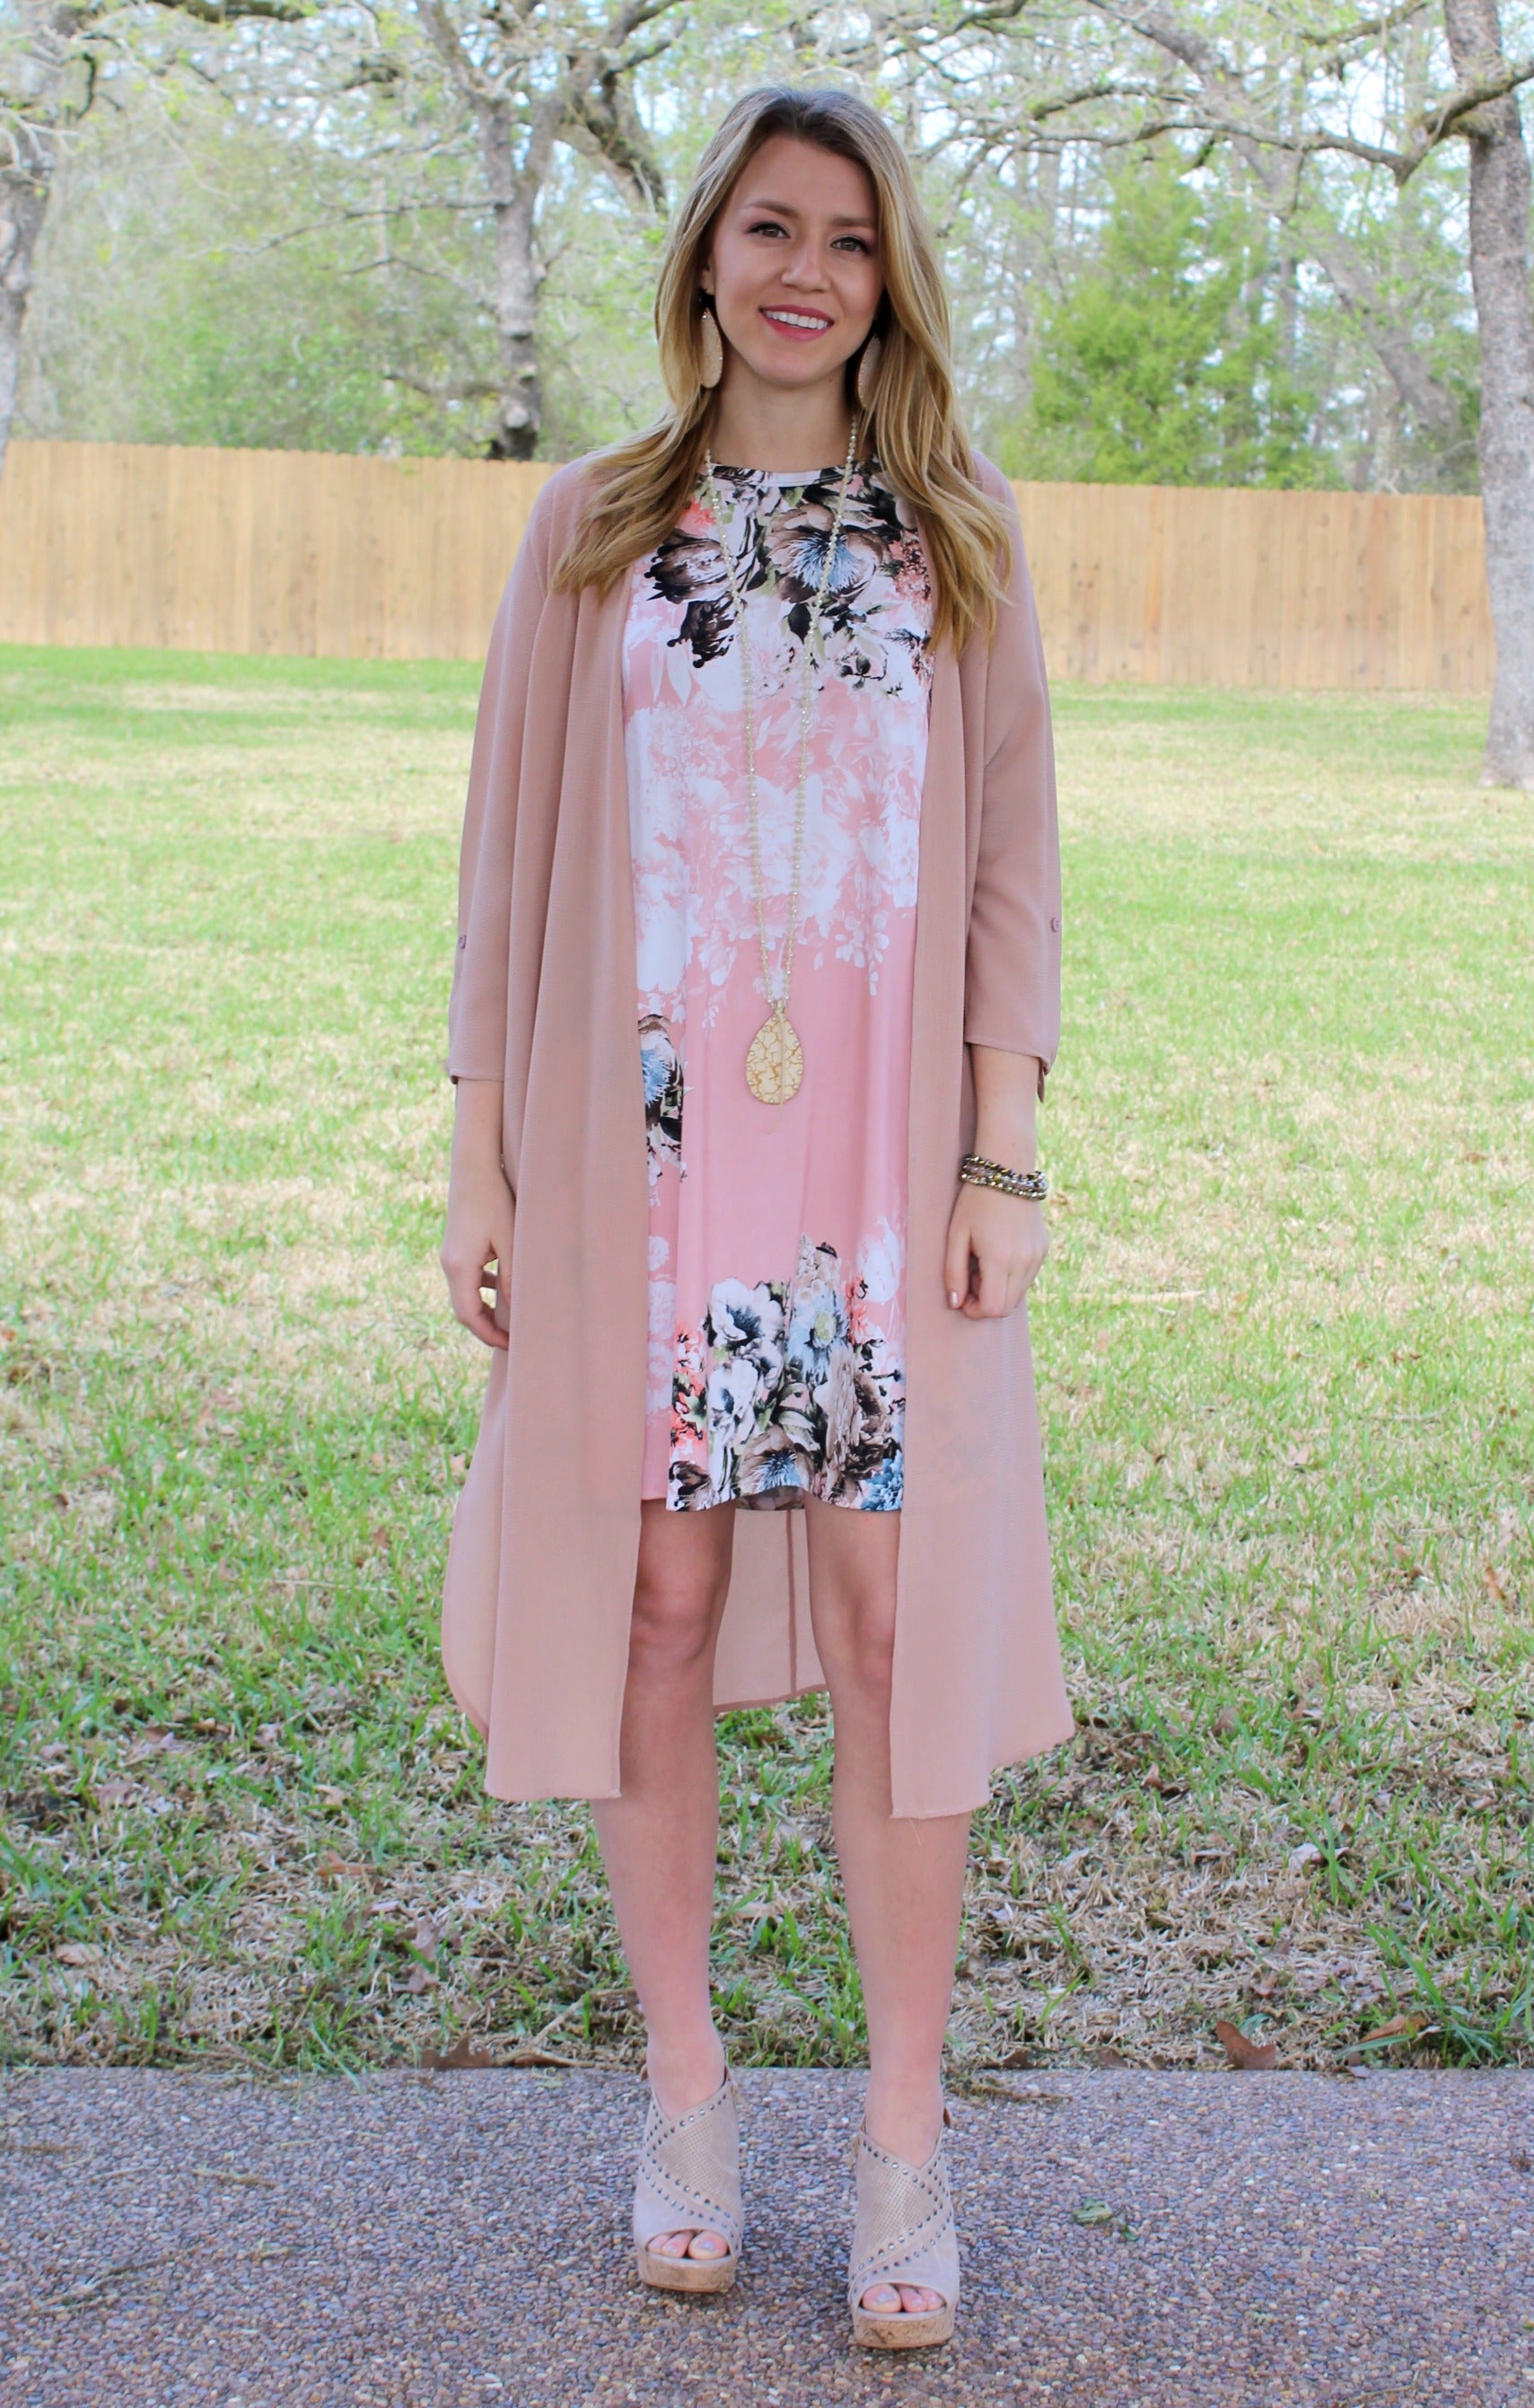 Last Chance Size Small | Simpler Times Midi Duster Kimono in Khaki - Giddy Up Glamour Boutique